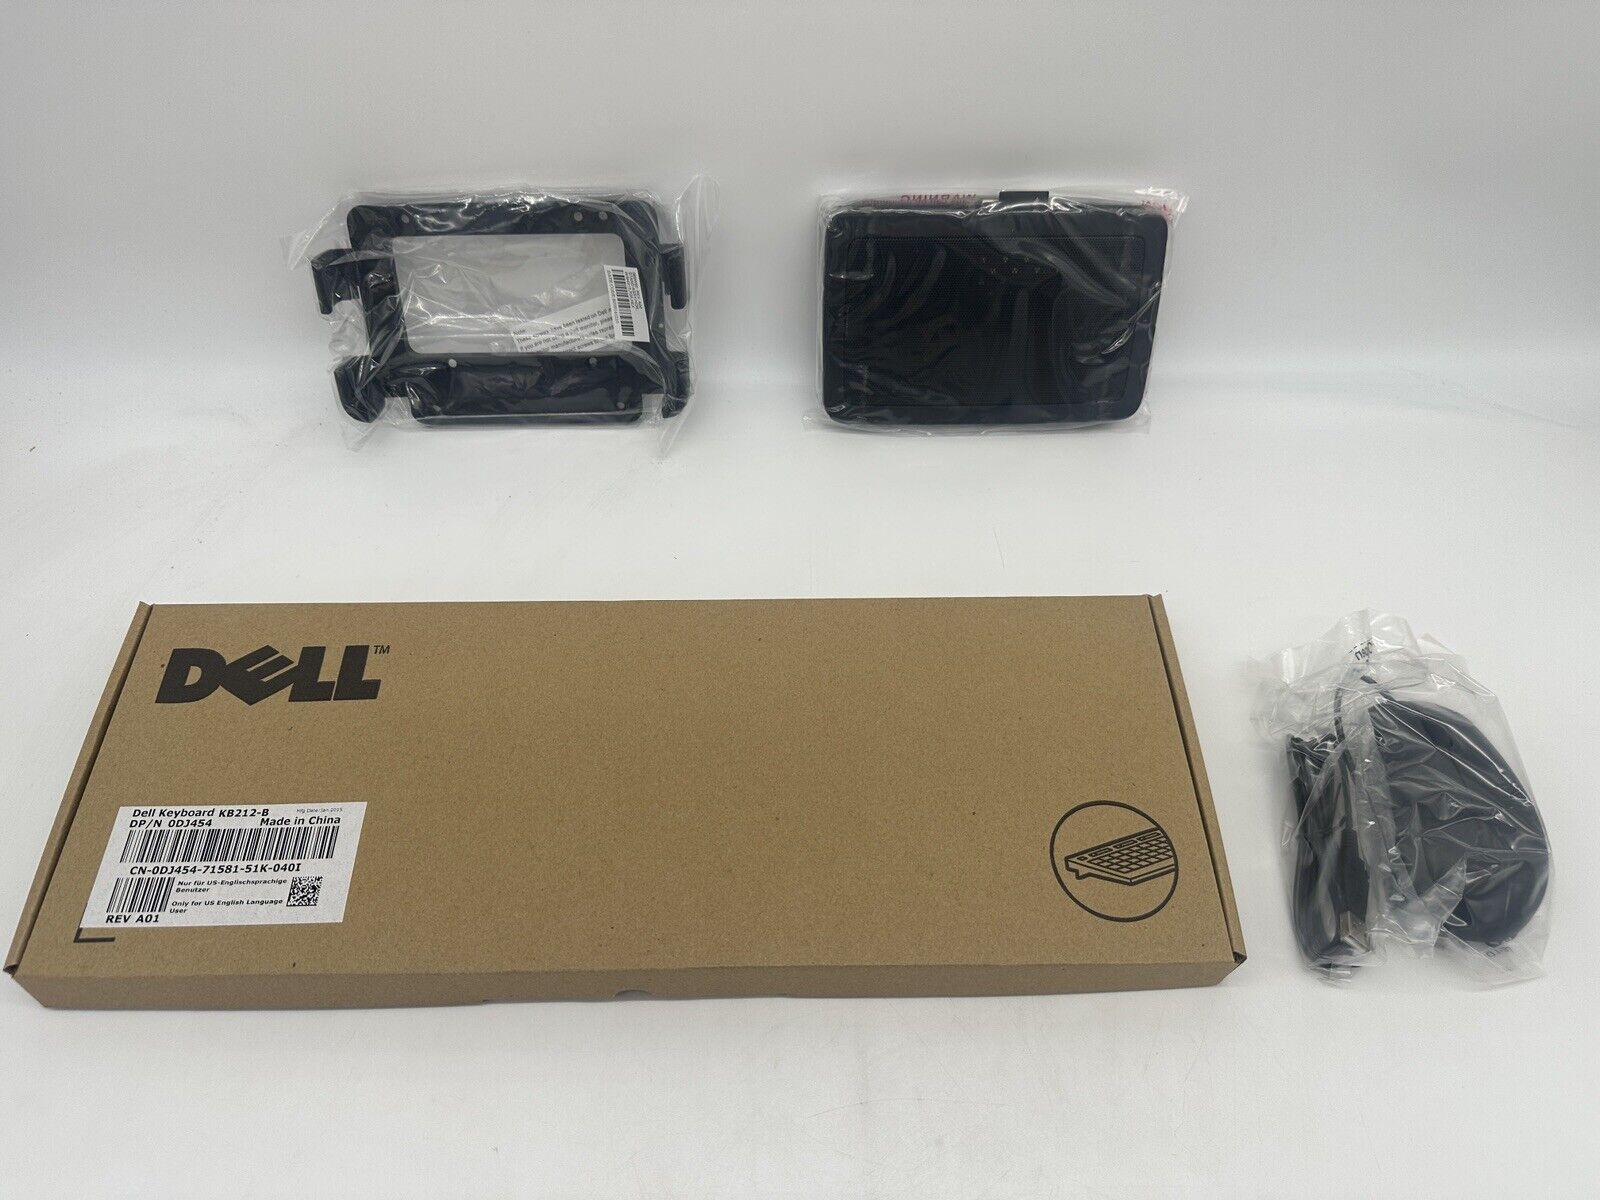 Dell Wyse 5020-P25 + Mouse & Keyboard Thin Client Bundle